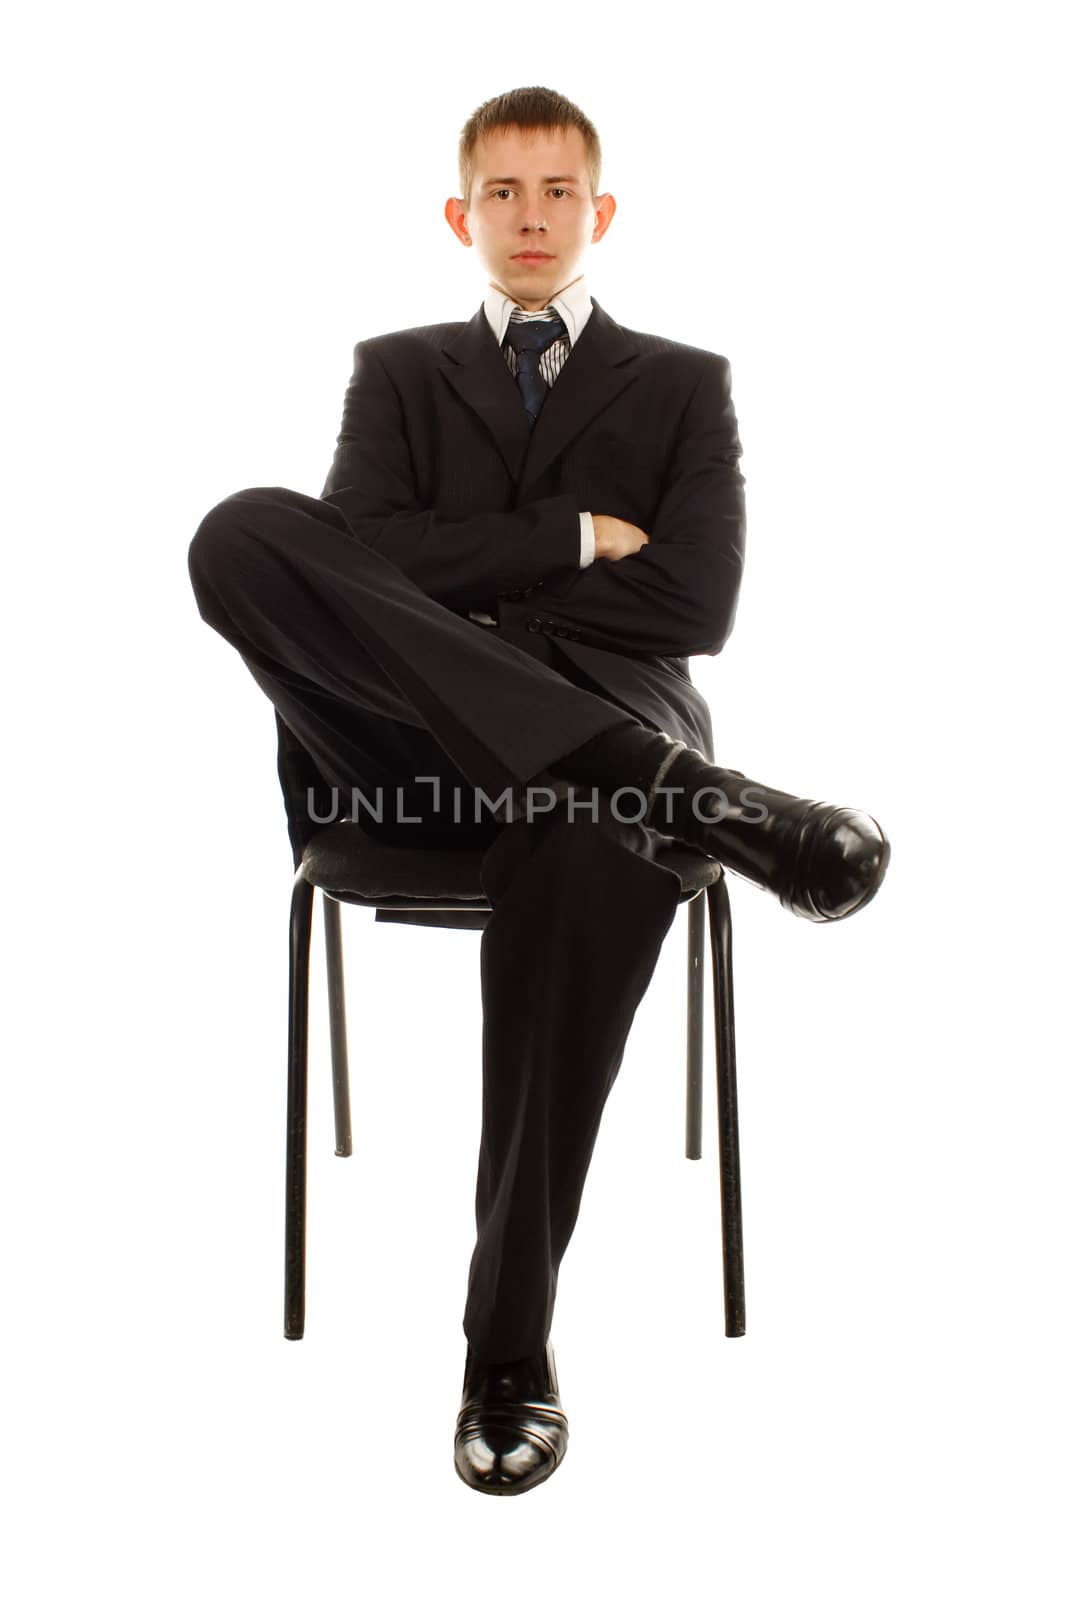 businessman on the chair by nigerfoxy